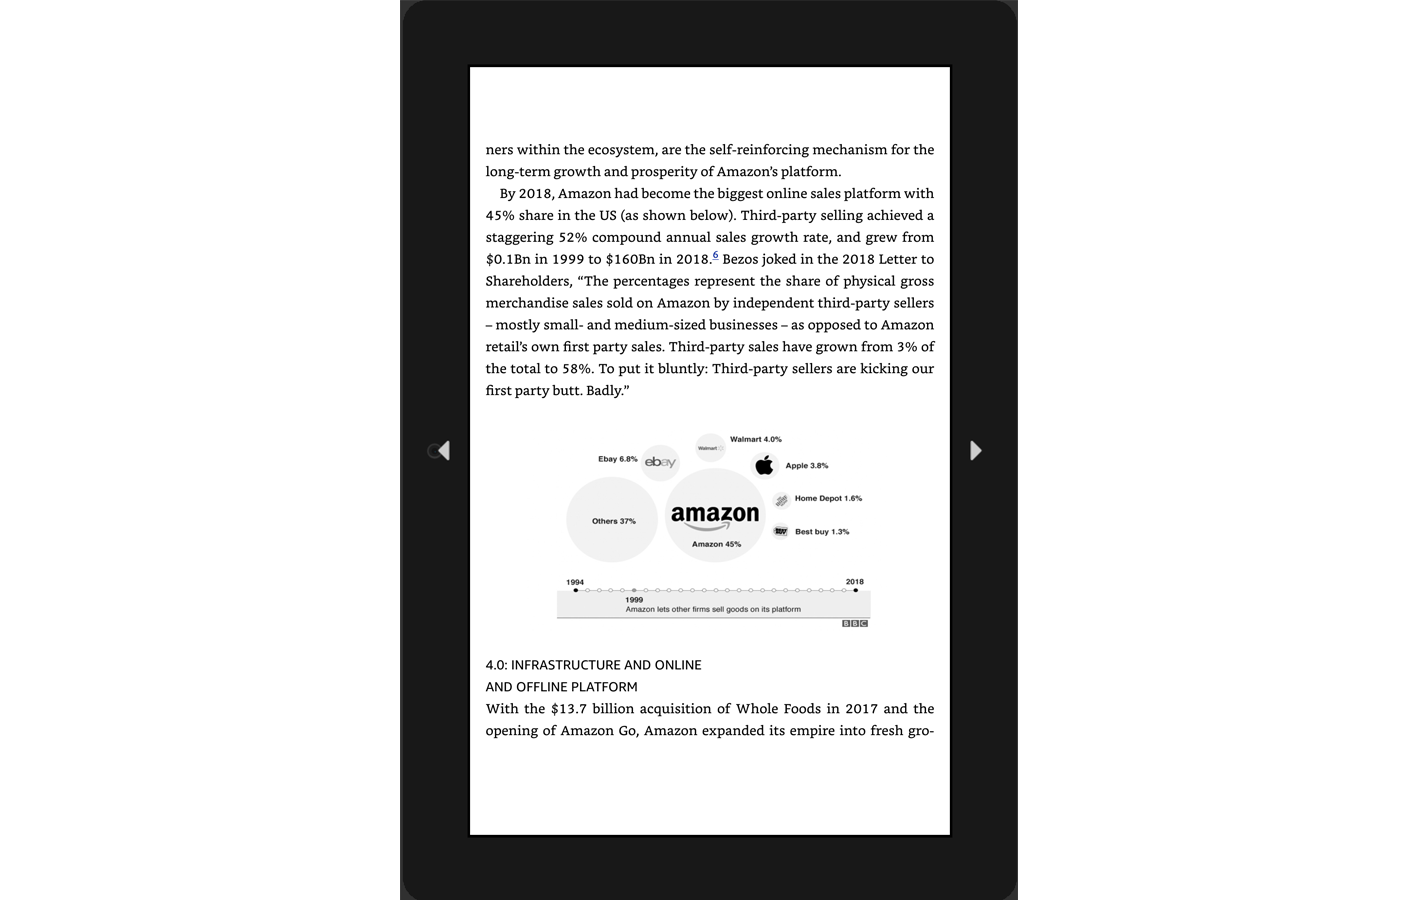 Kindle-5 for The Amazon Management System